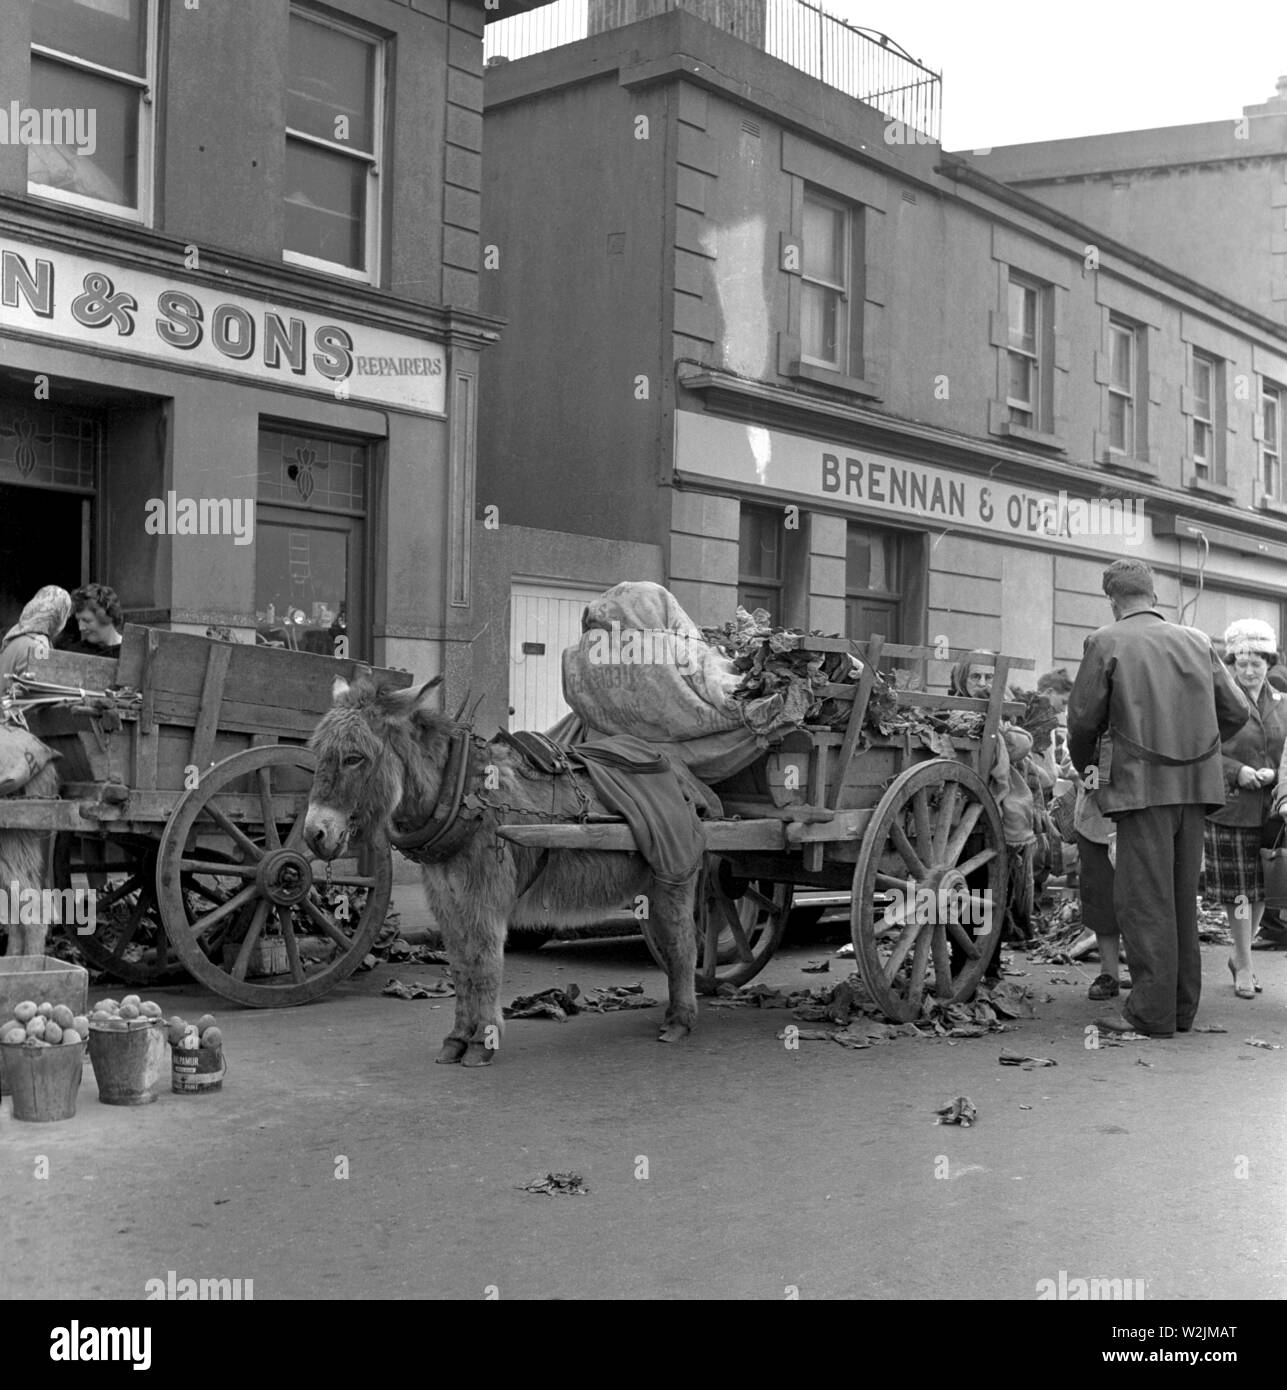 Selling cabbages and potatoes in the street from carts pulled by a donkey, probably near the Sandyford area in Dublin, Ireland c1960 Photo by Tony Henshaw Stock Photo